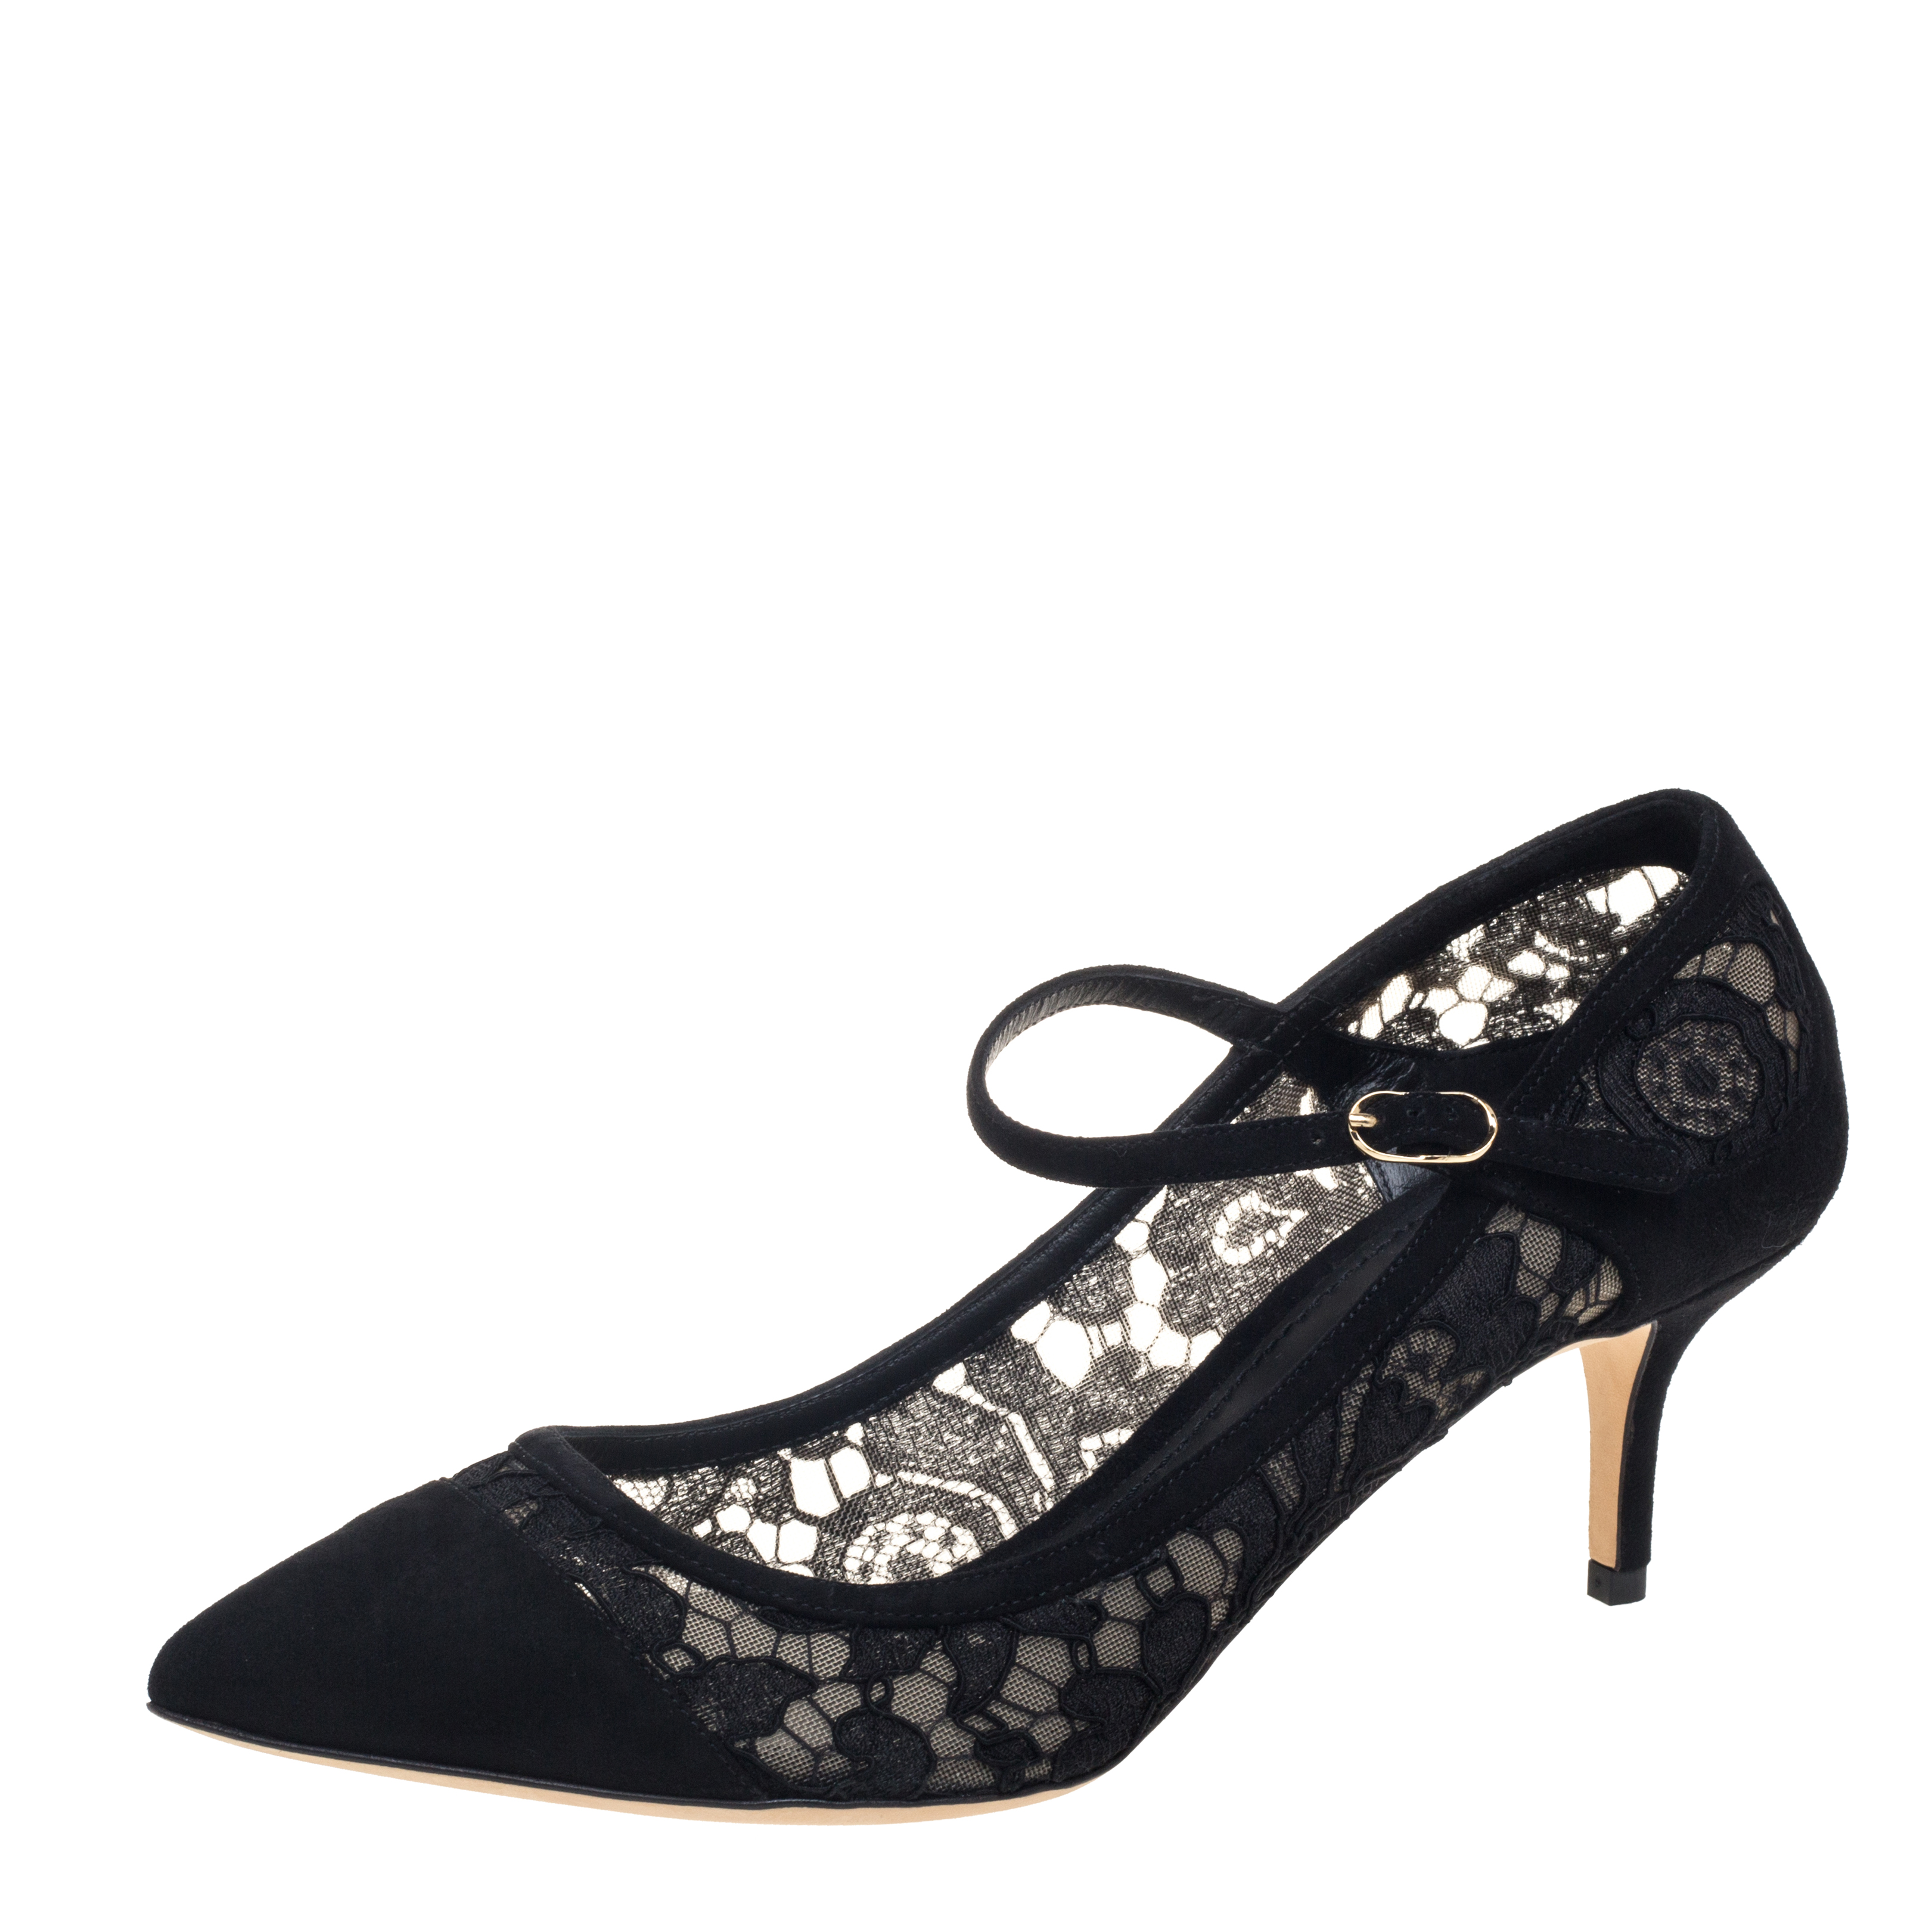 Dolce & Gabbana Lace And Suede Mary Jane Pumps Size 39.5